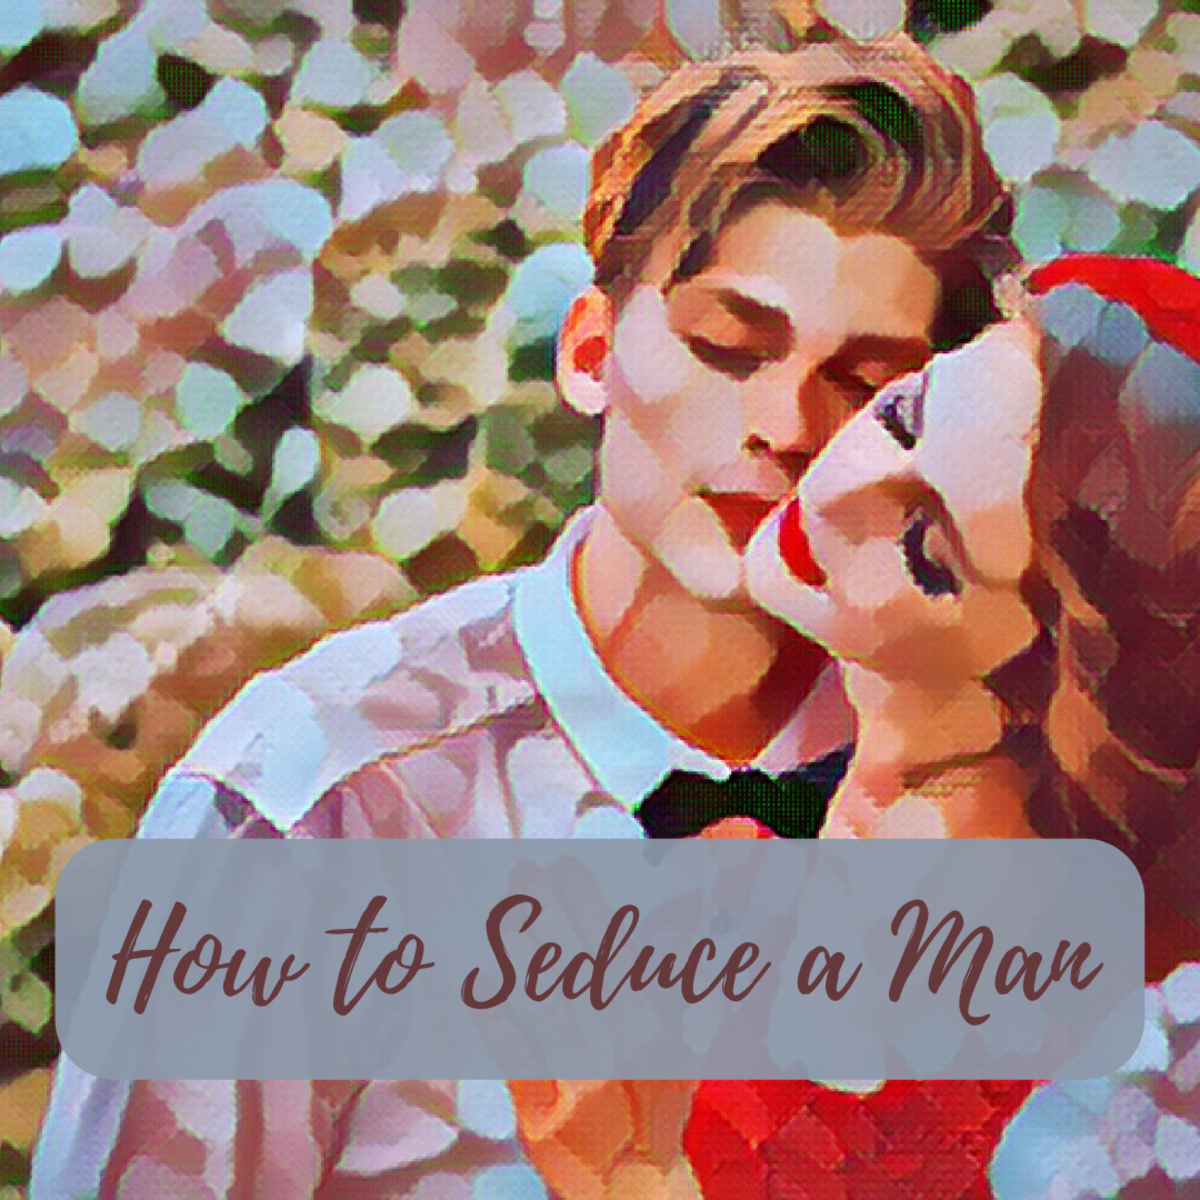 10 tips for seducing the man of your dreams